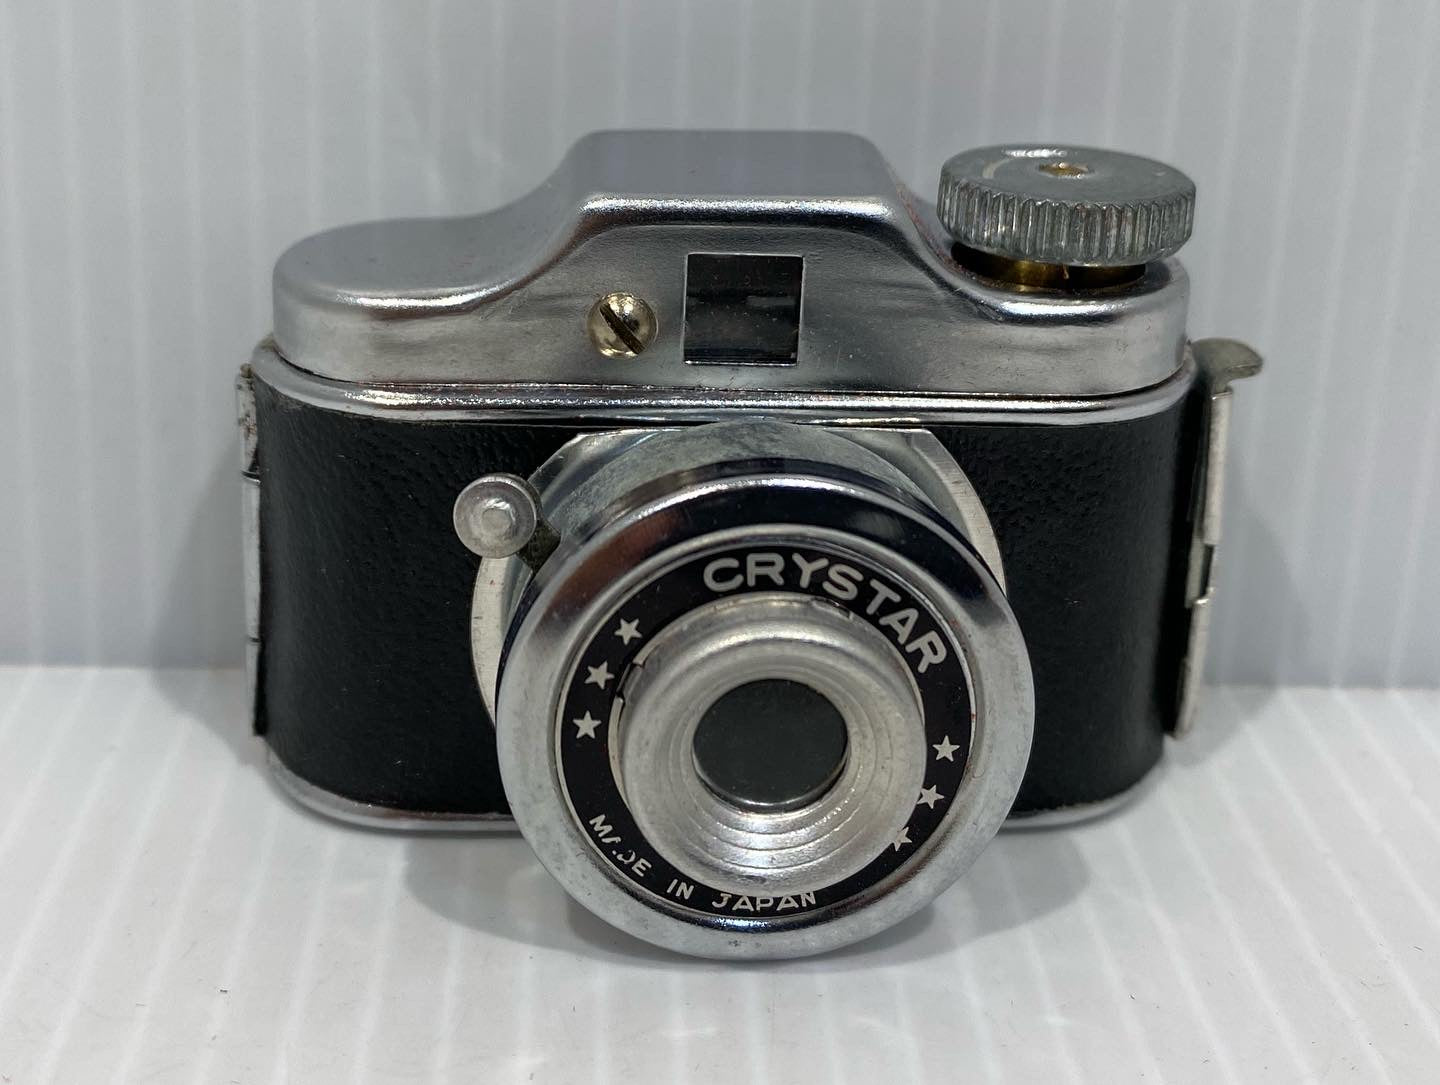 Vintage 1950's Miniature Crystar mini Camera with original leather case. Made in Japan!